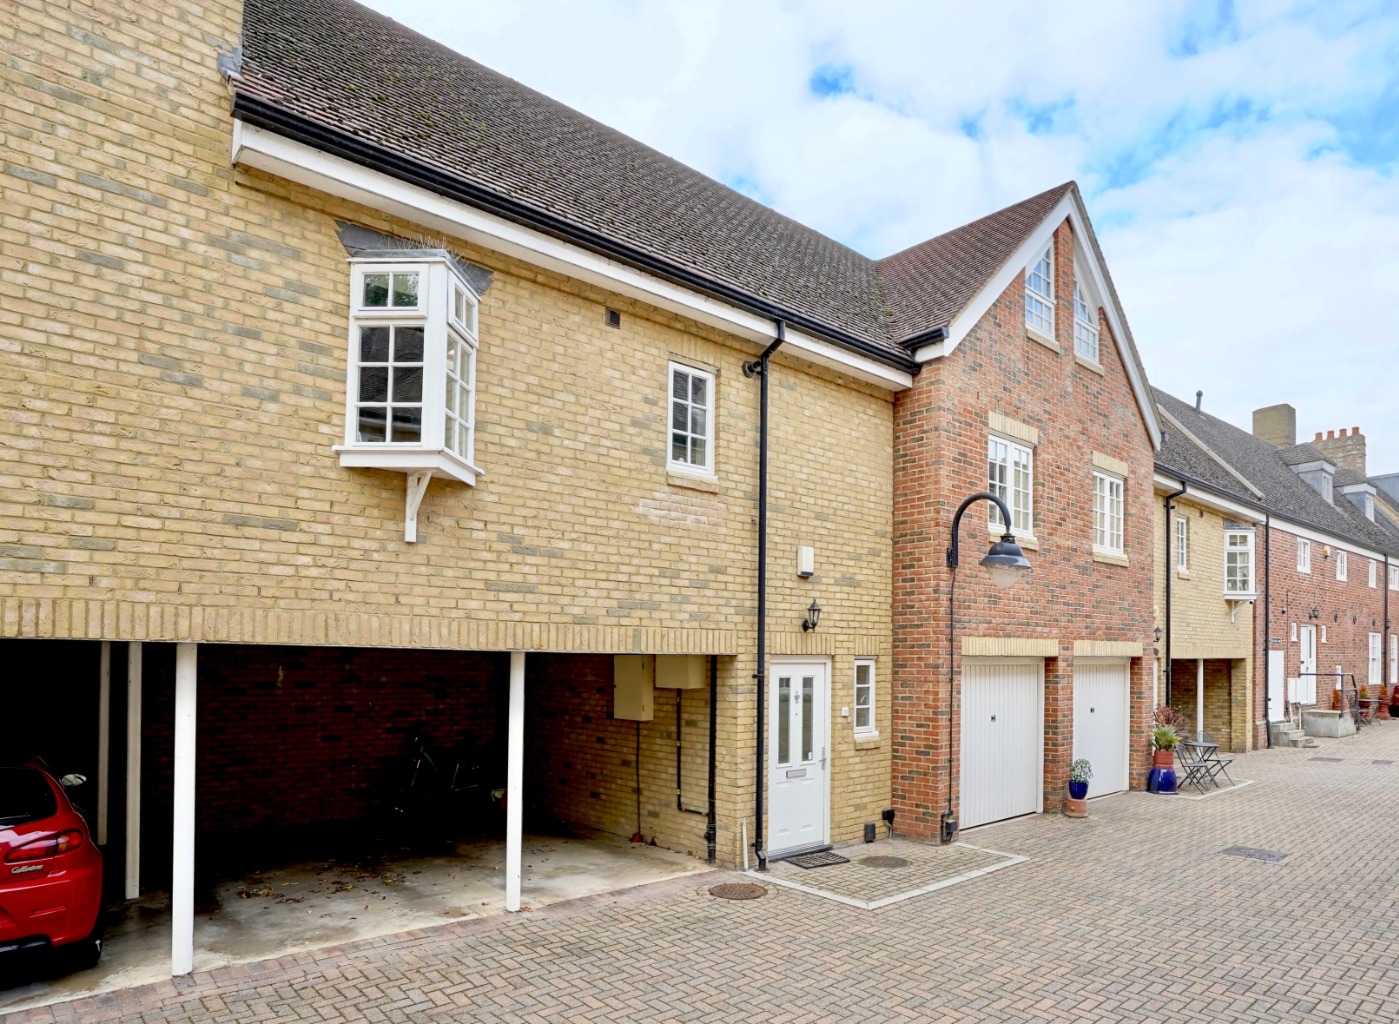 2 bed terraced house for sale in Chandlers Wharf, St. Neots - Property Image 1